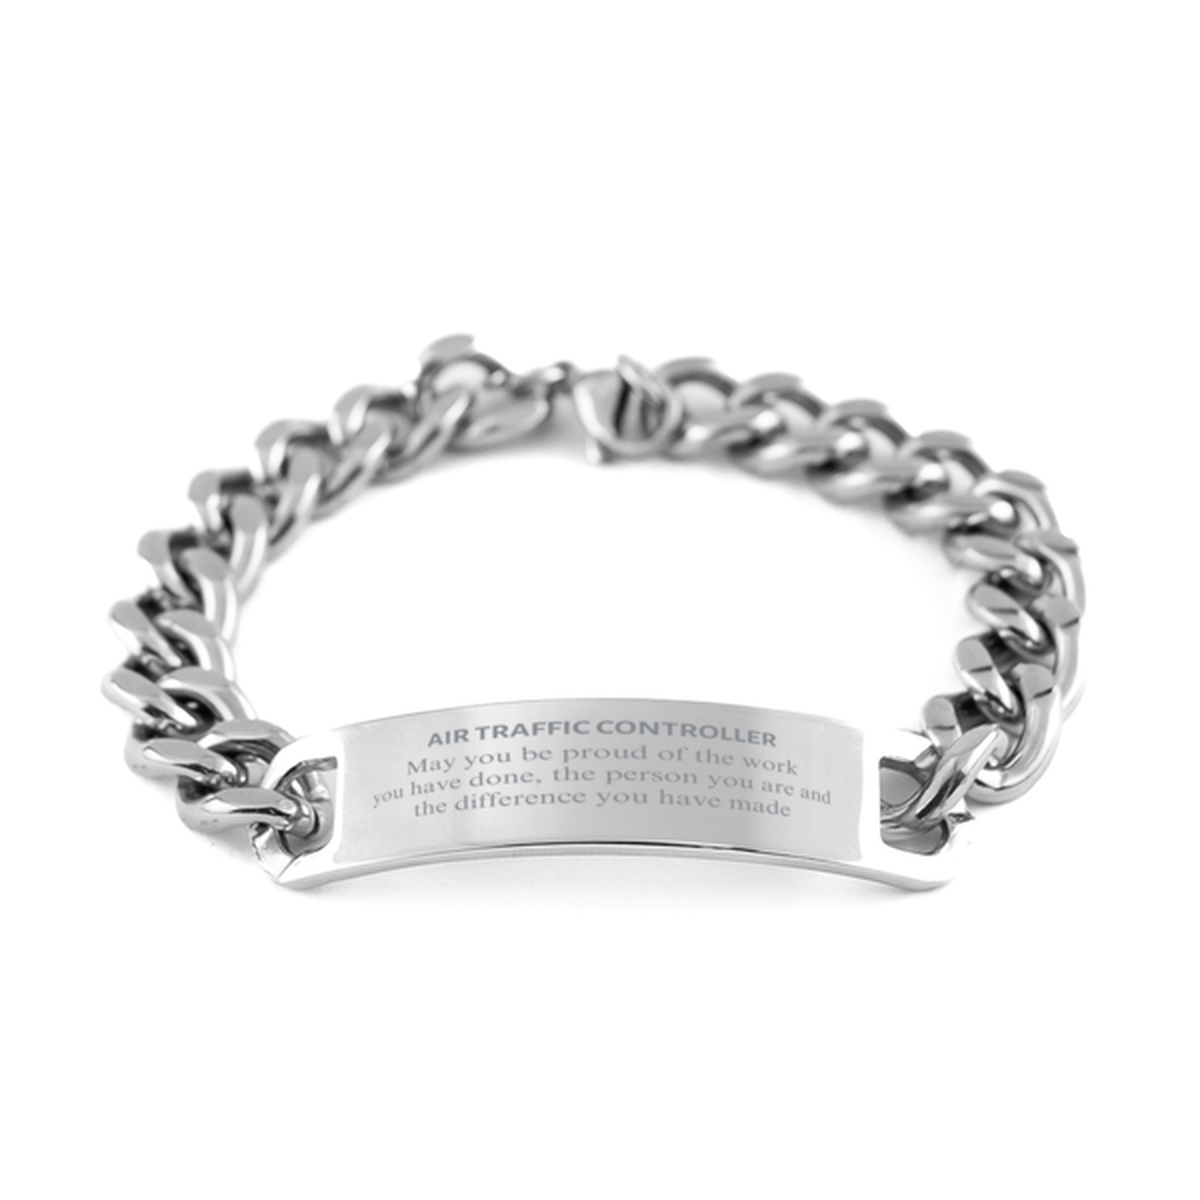 Air Traffic Controller May you be proud of the work you have done, Retirement Air Traffic Controller Cuban Chain Stainless Steel Bracelet for Colleague Appreciation Gifts Amazing for Air Traffic Controller